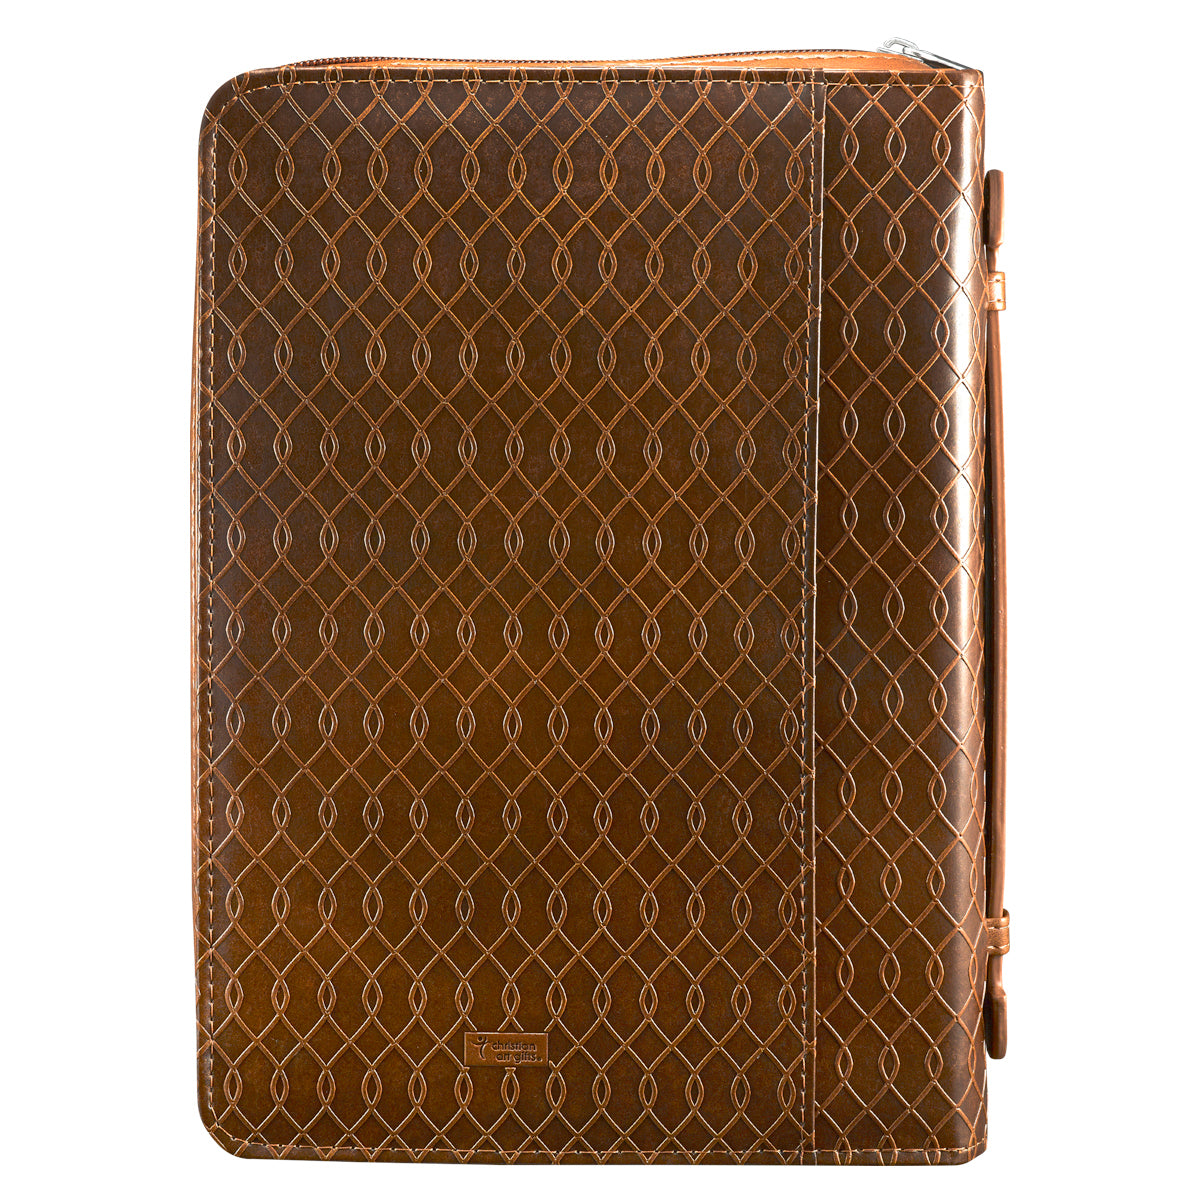 Image of Jeremiah 29:11 (Brown) Two-tone LuxLeather Bible Cover - Medium other